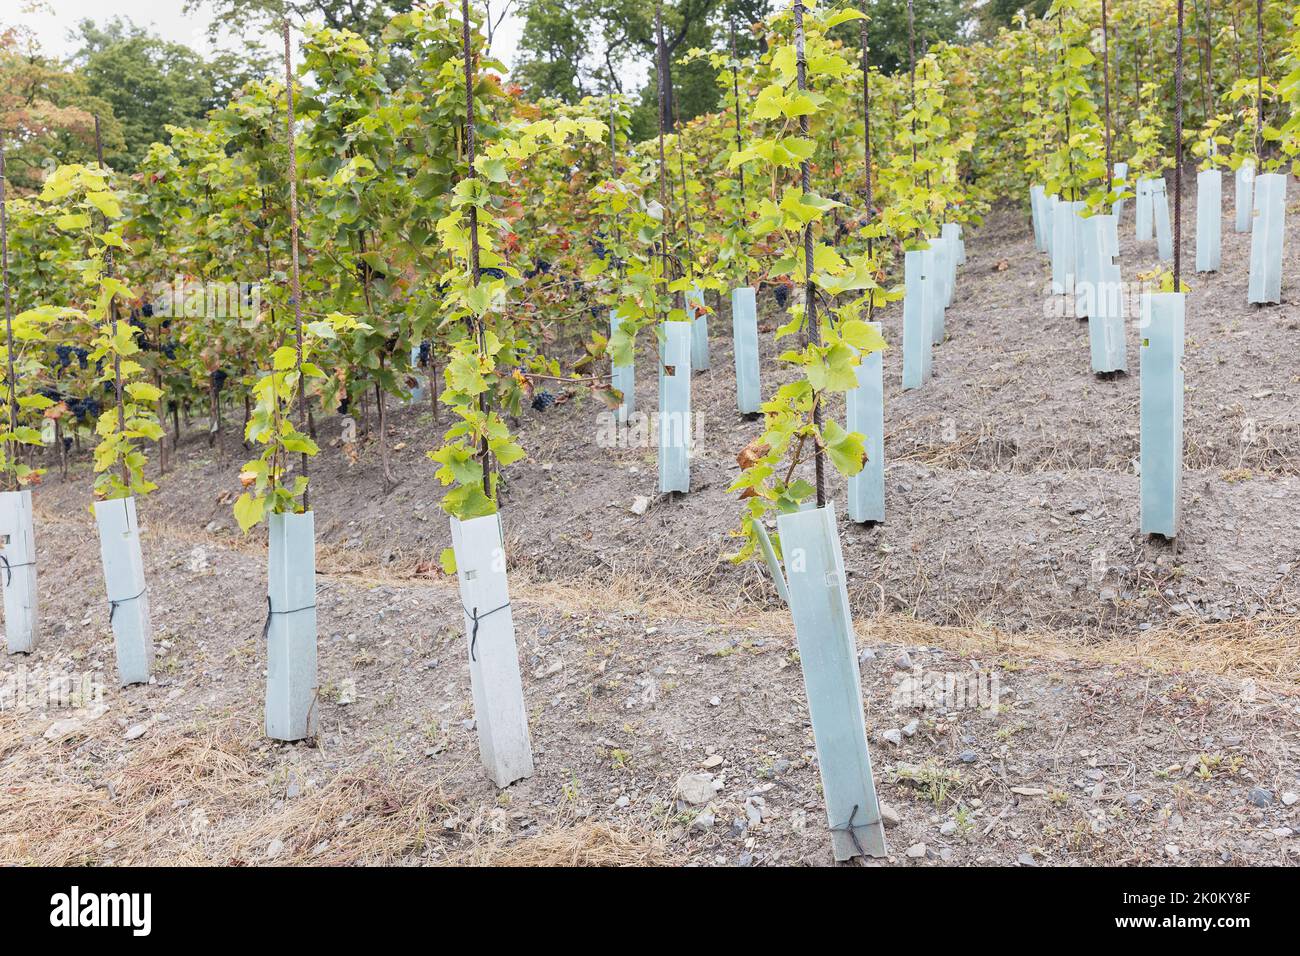 Rows of young trained grape vines on iron support pole covered with protective plastic tree guards in vineyard. Fall season, harvest time. Winegrowing, viniculture concept. Selective focus Stock Photo